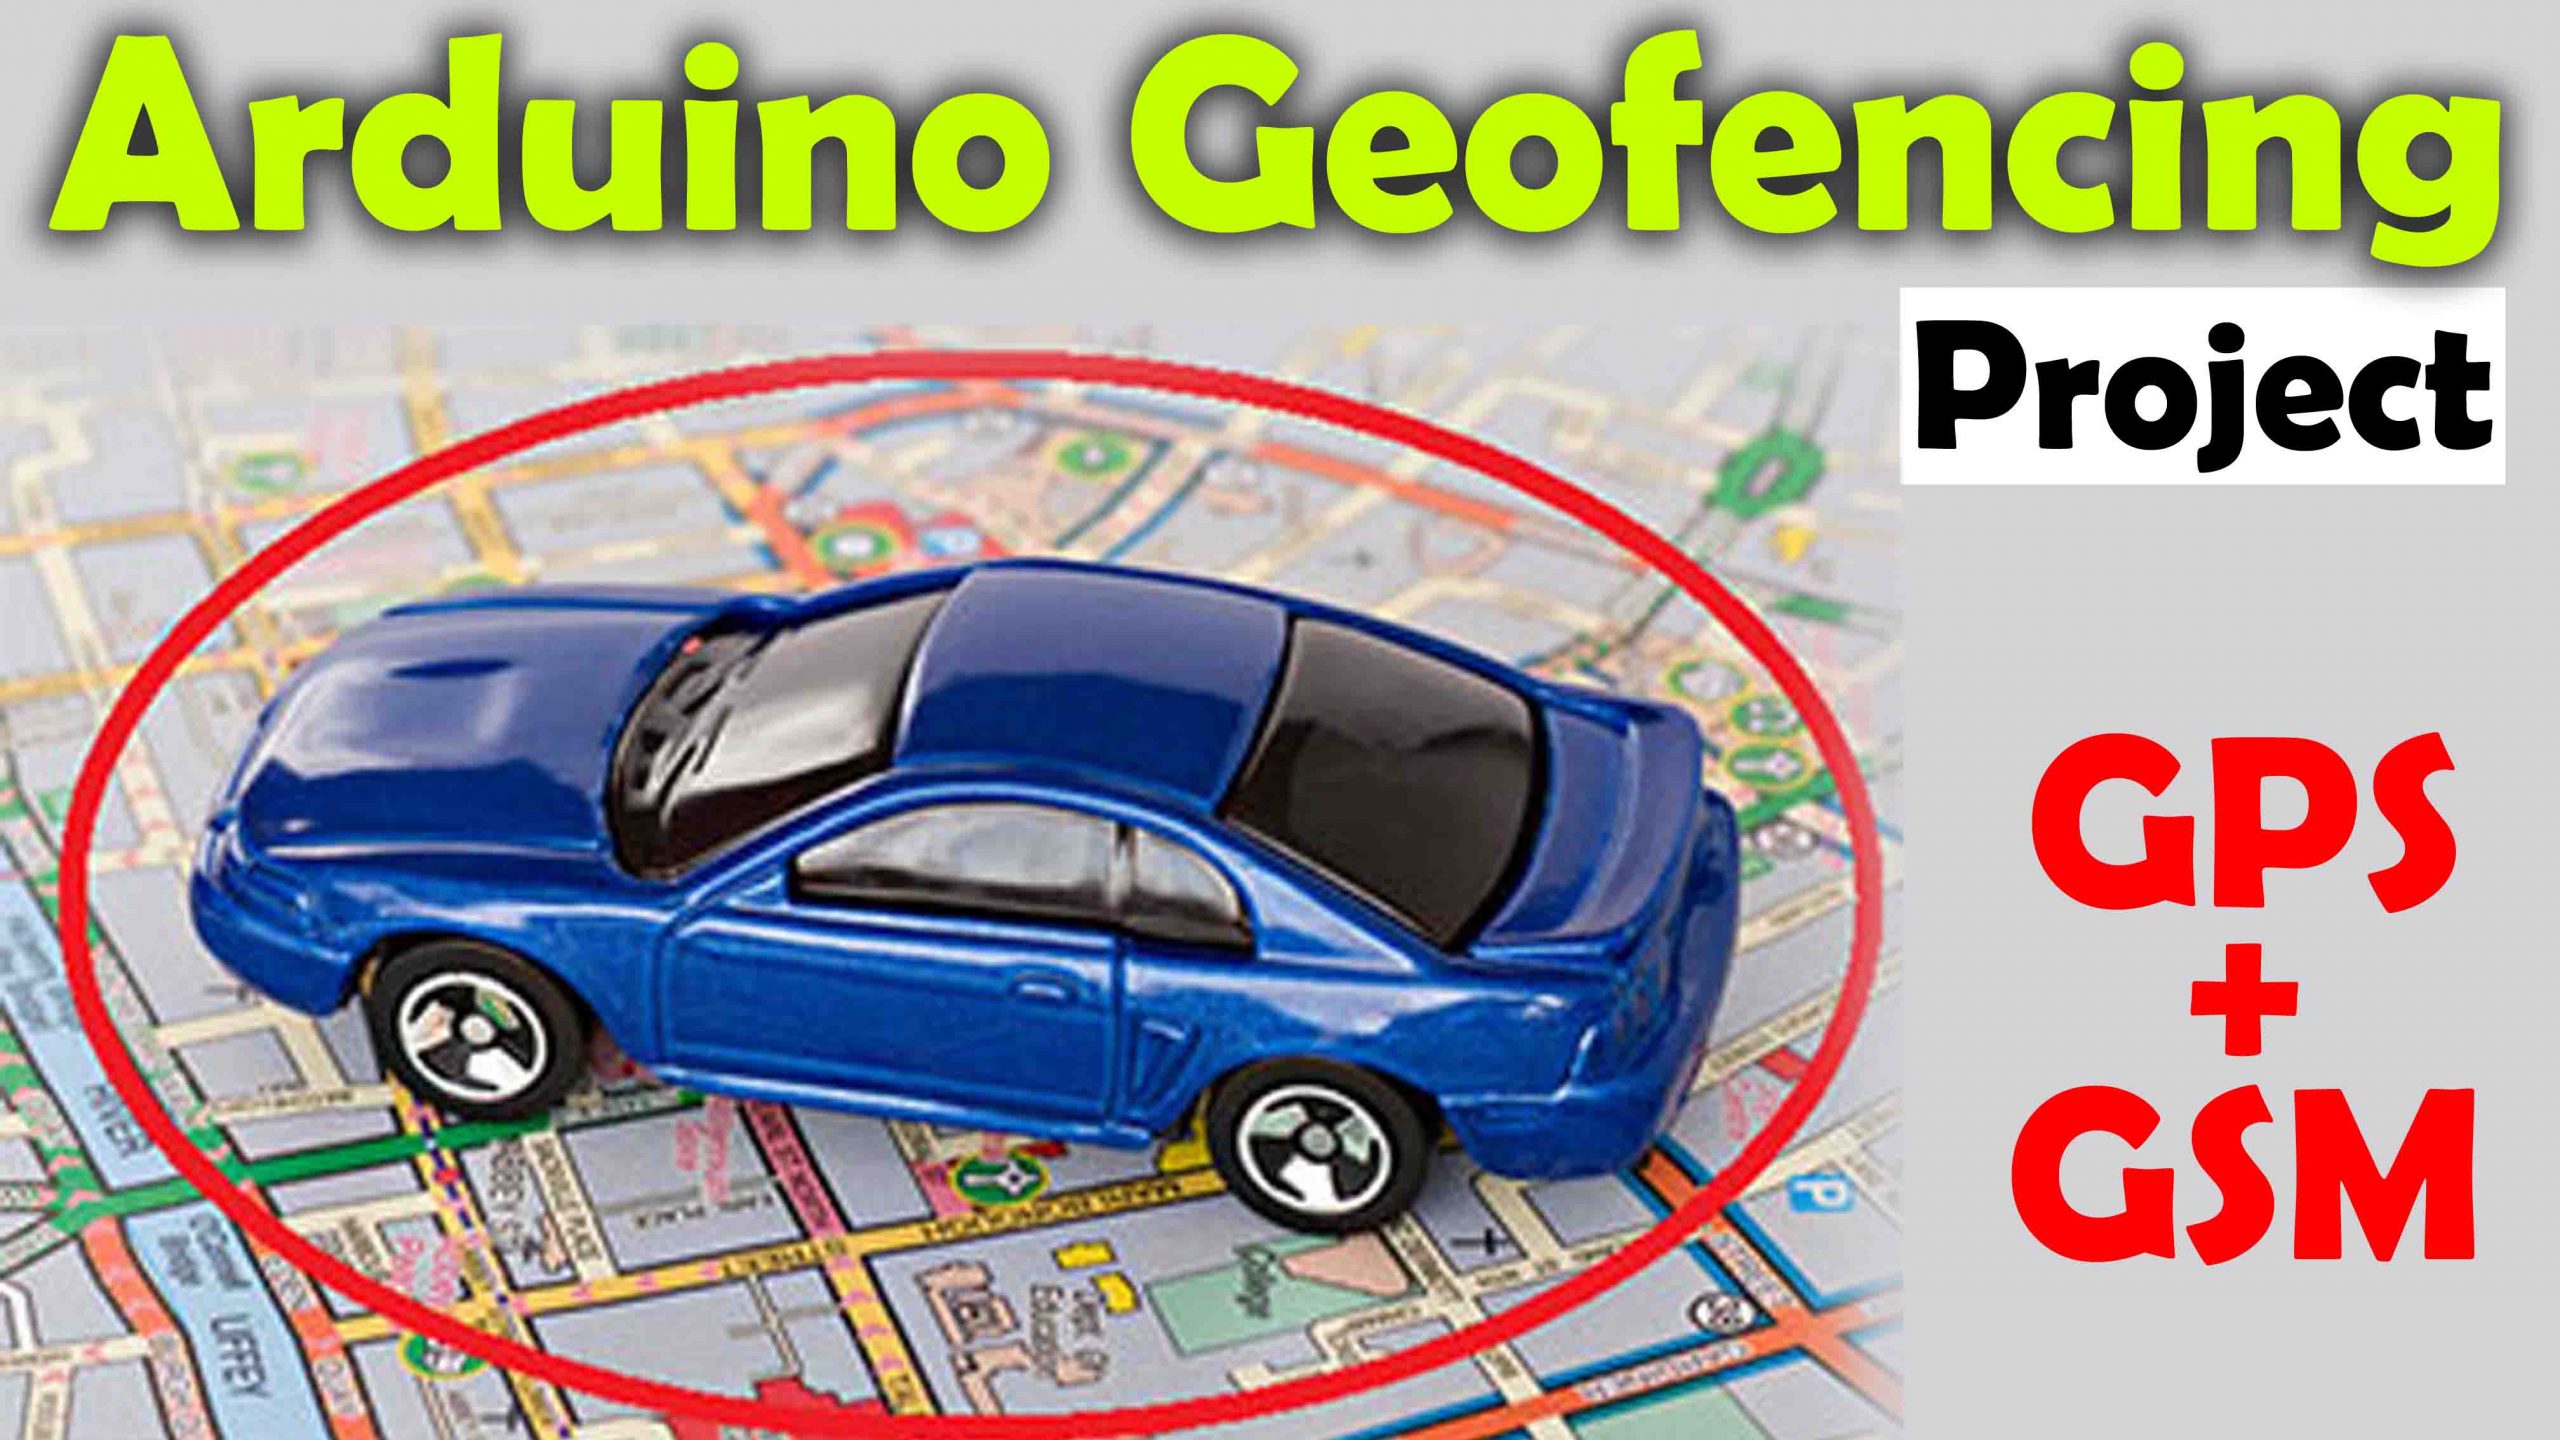 Geofencing in cars